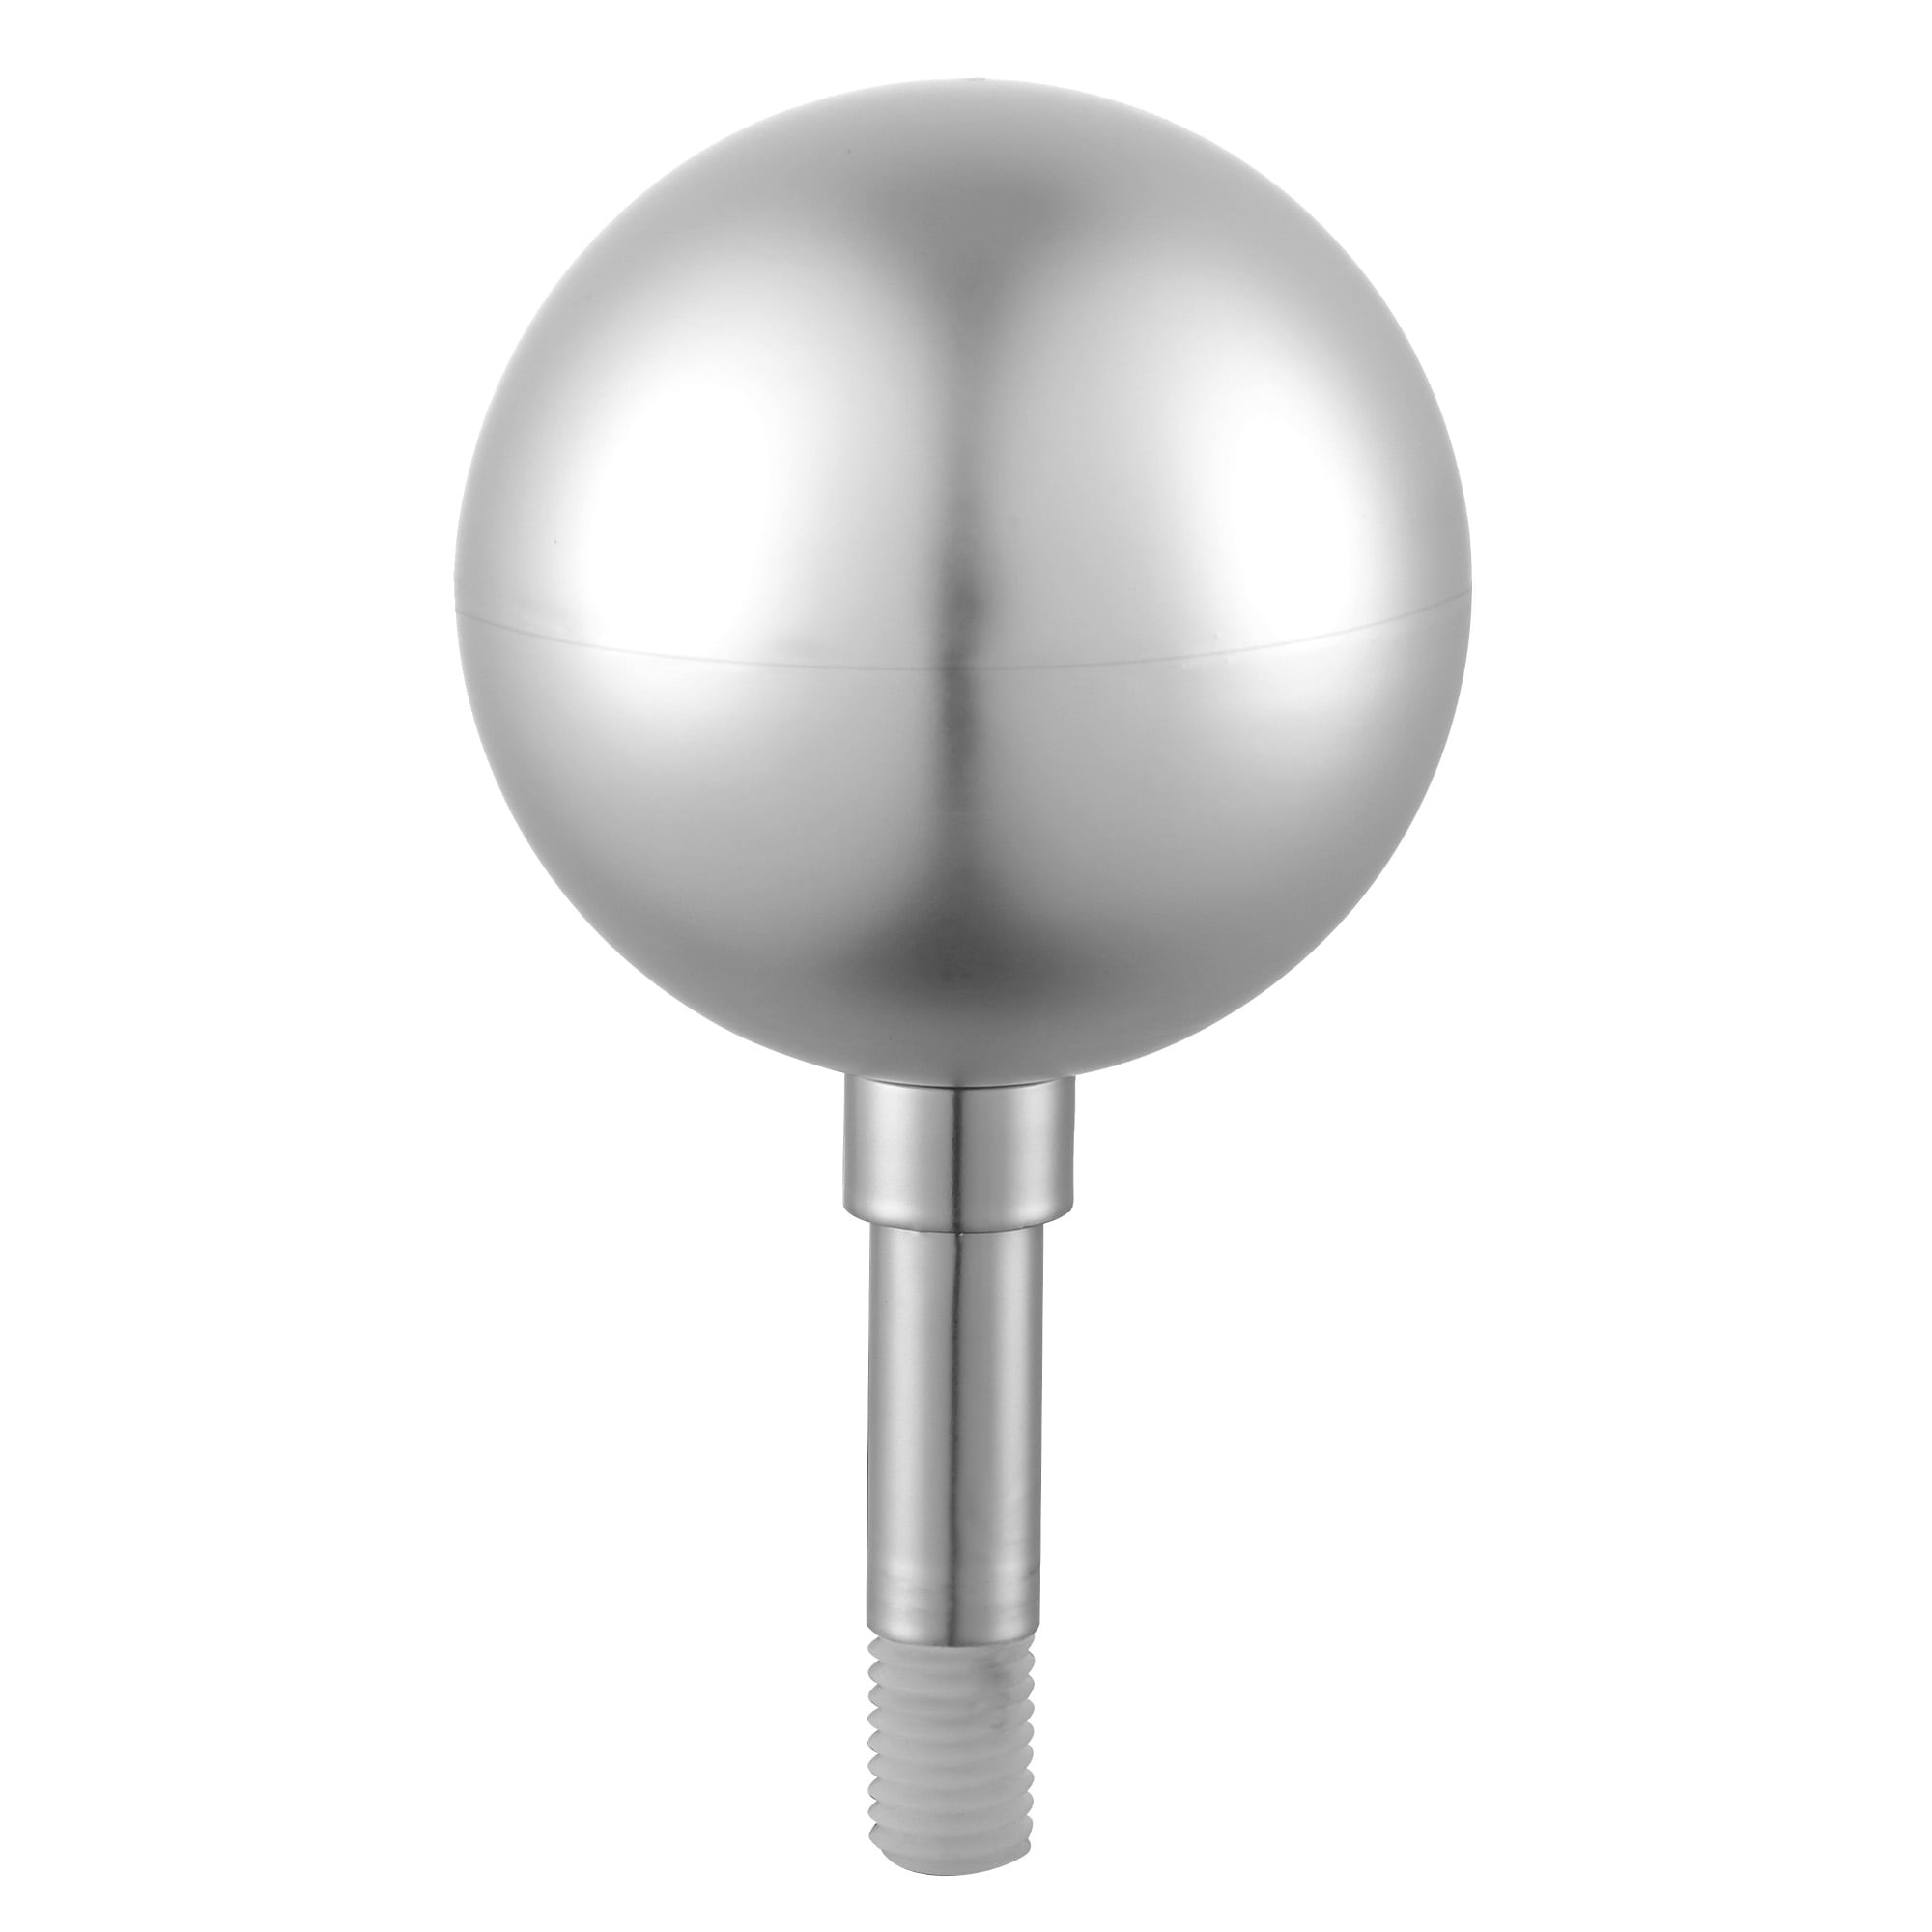 Satco® Burnished Brass Finial Ball Pack Of 10